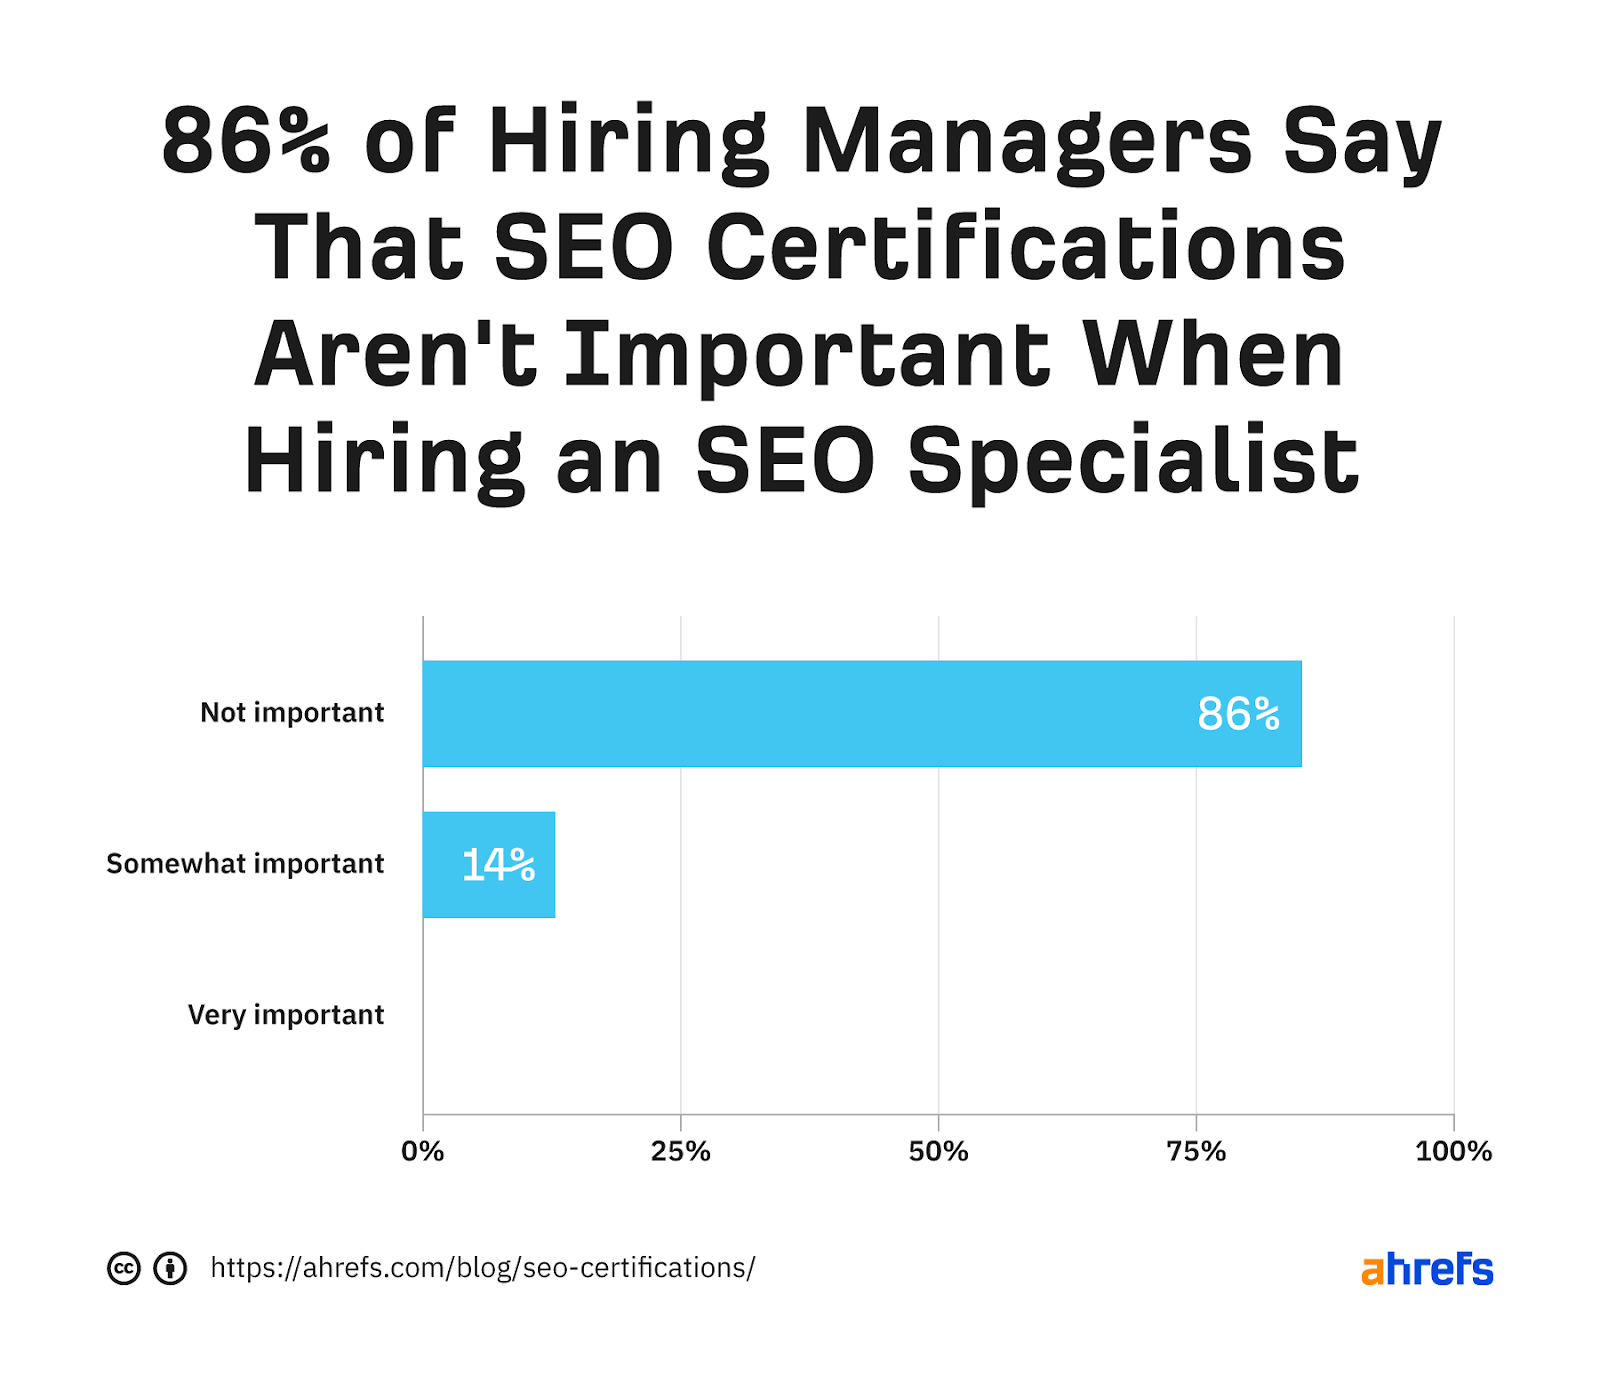 86% of hiring managers say that SEO certifications aren't important when hiring an SEO specialist
